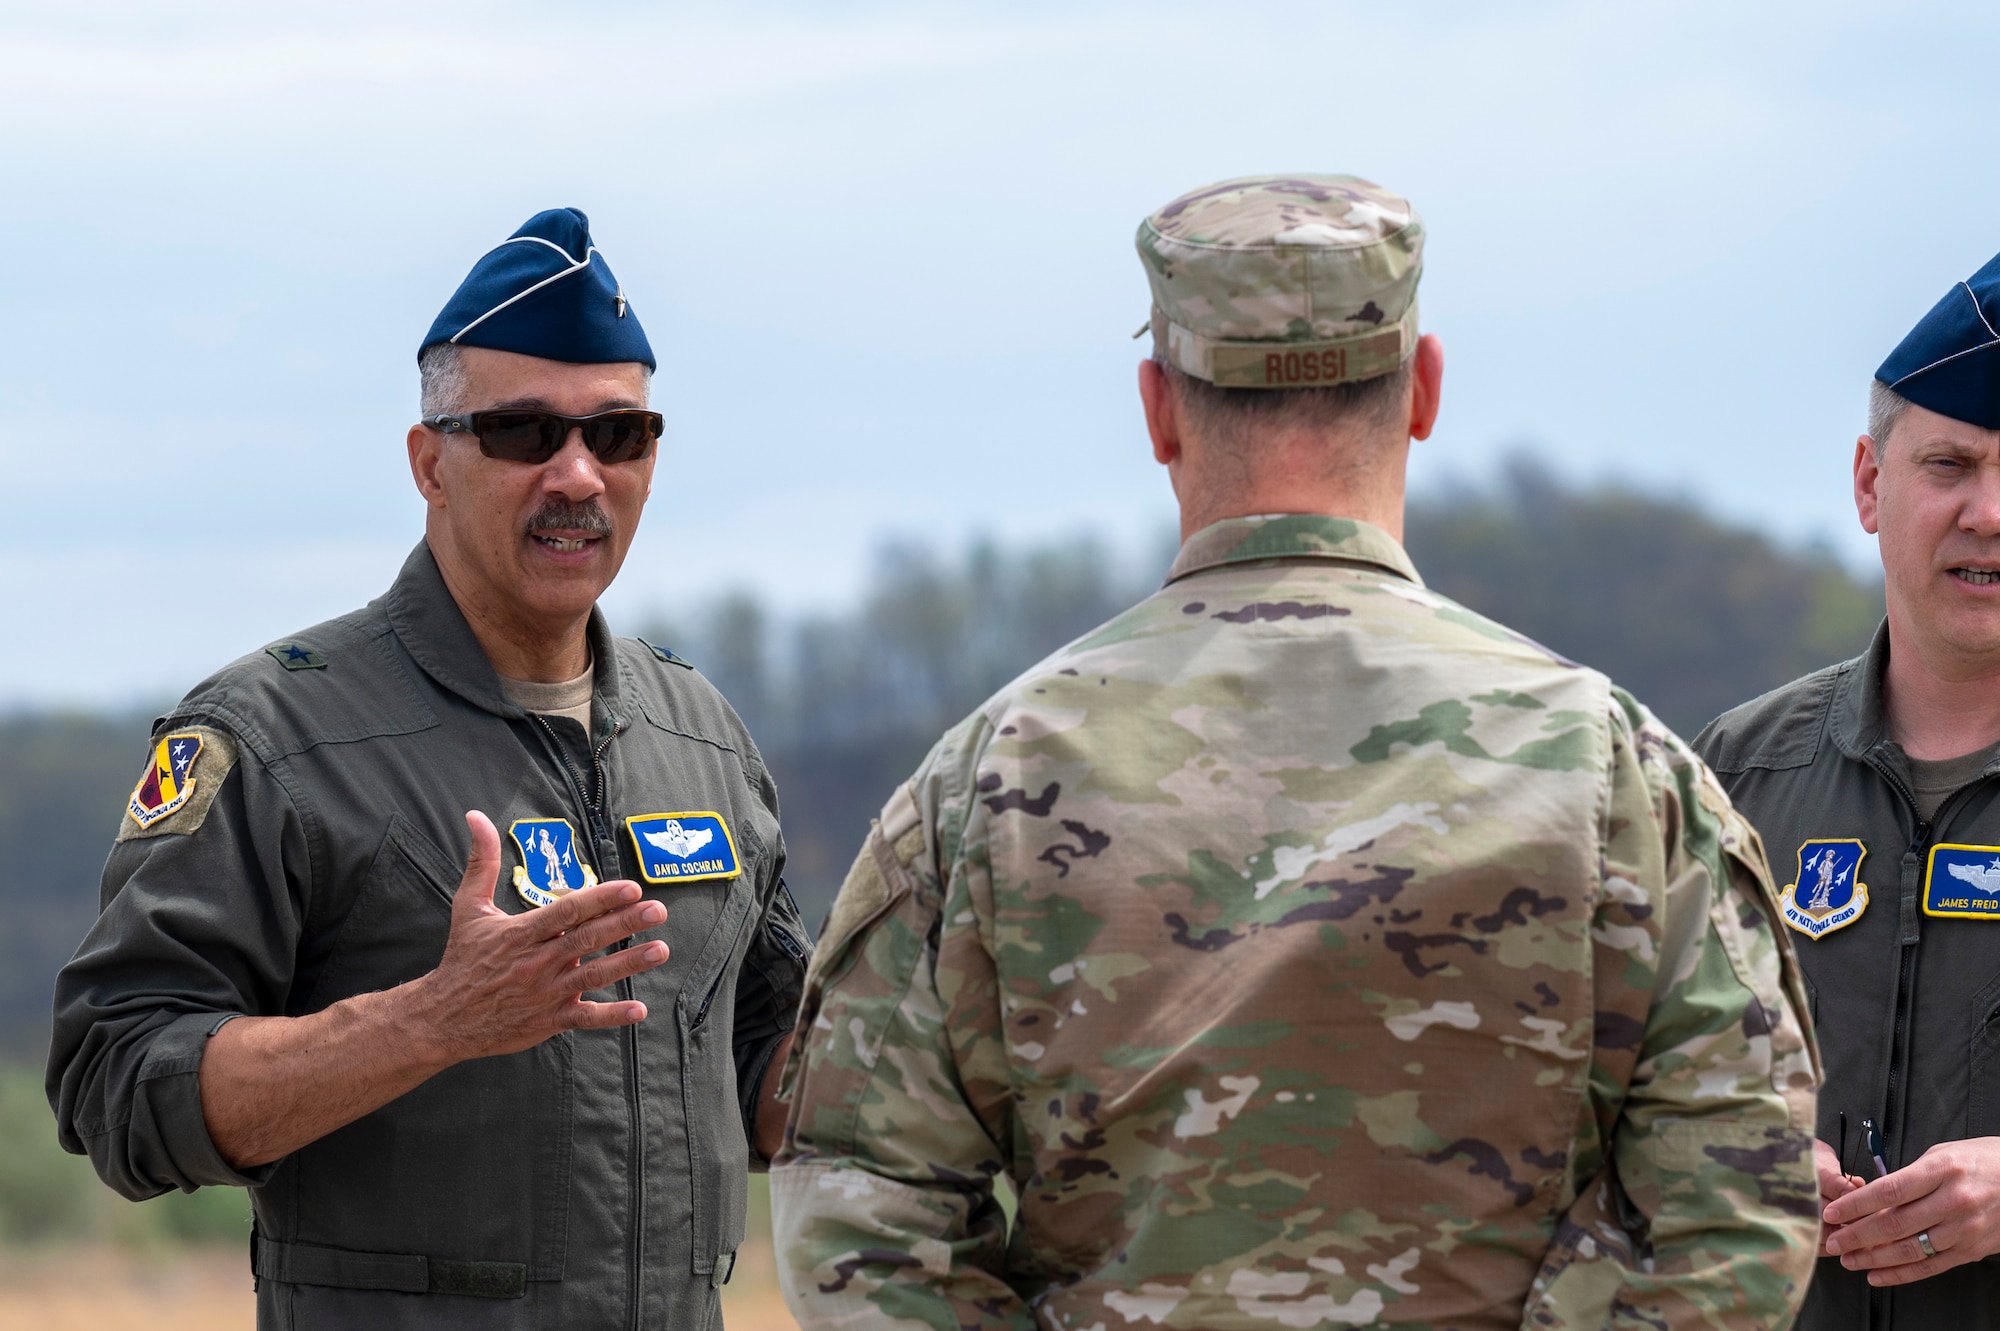 .S. Air Force Brig. Gen. David Cochran, Adjutant General-Air, West Virginia National Guard talks with Col. James Rossi, Alpena CRTC Commander, Michigan Air National Guard during Sentry Storm 24 DV Day, April 17, 2024, at Camp Branch, Logan County, W.Va. Sentry Storm is an exercise staged at McLaughlin ANGB in Charleston, Camp Branch in Logan County, Shepherd Field in Martinsburg and the skies over West Virginia, involving an estimated 500 personnel from the state’s Air and Army National Guard, partnering National Guard units from Kentucky, North Carolina, and Michigan, as well as Civil Air Patrol units. (U.S. Air National Guard photo by 2nd Lt. De-Juan Haley)